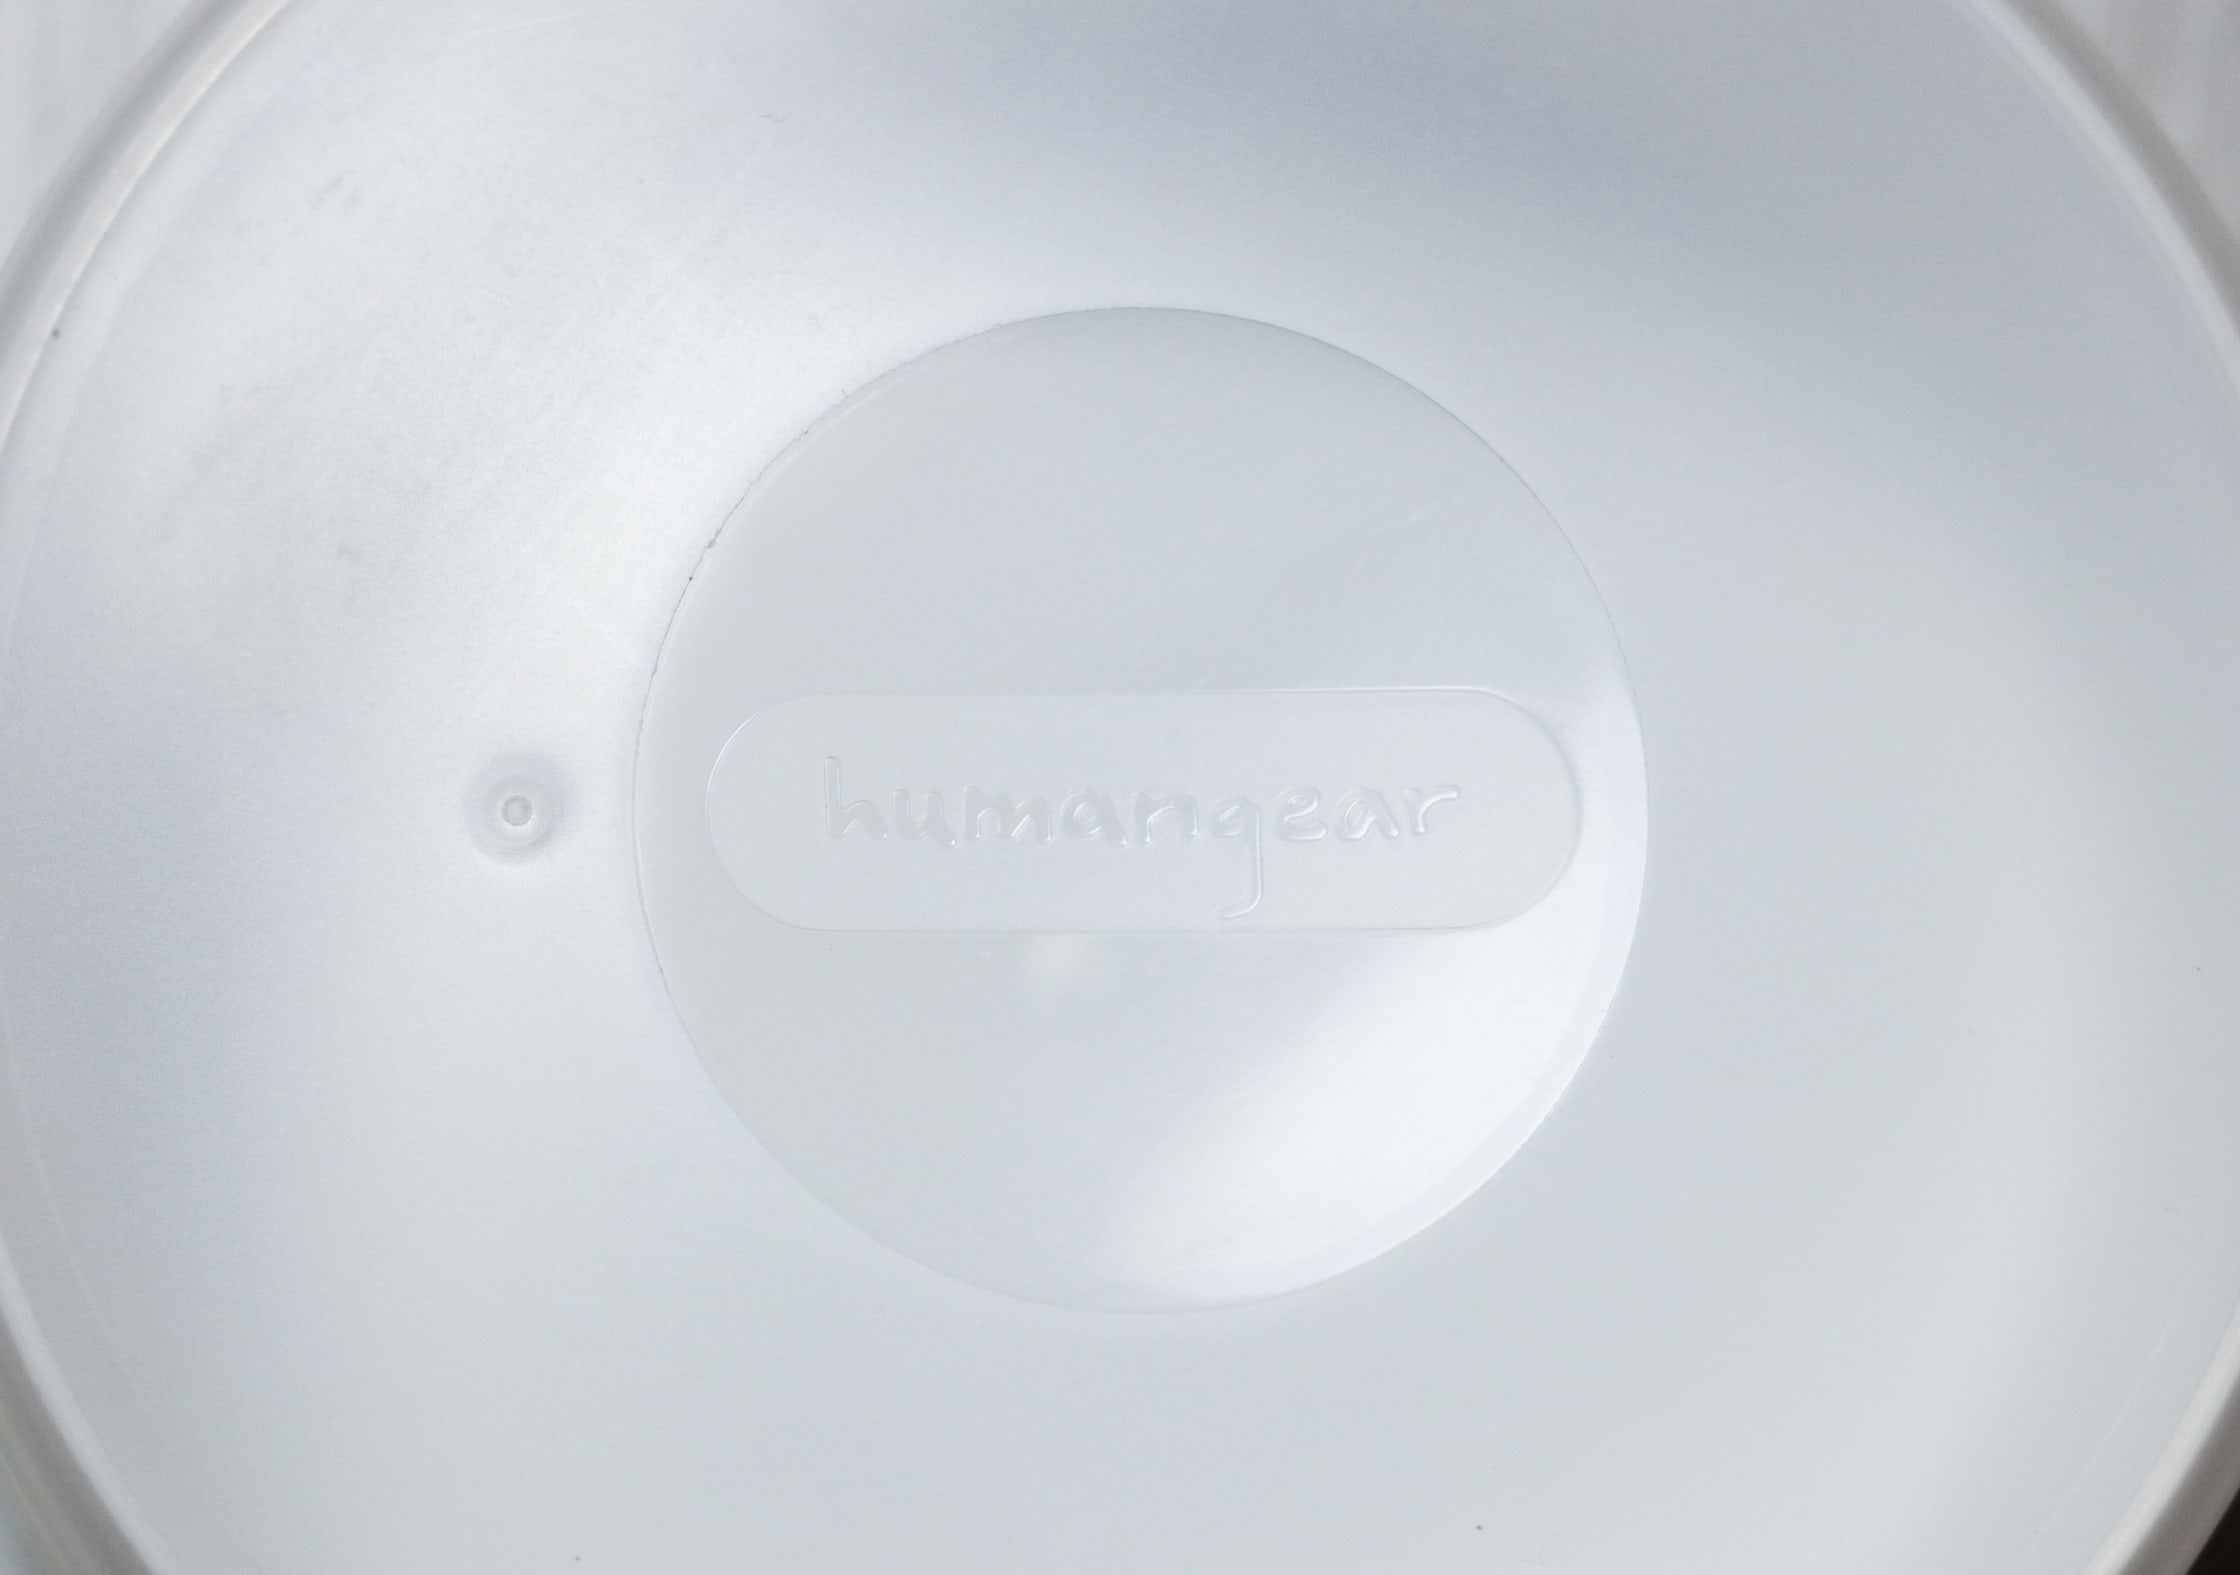 Humangear Logo On Top Of The GoTubb